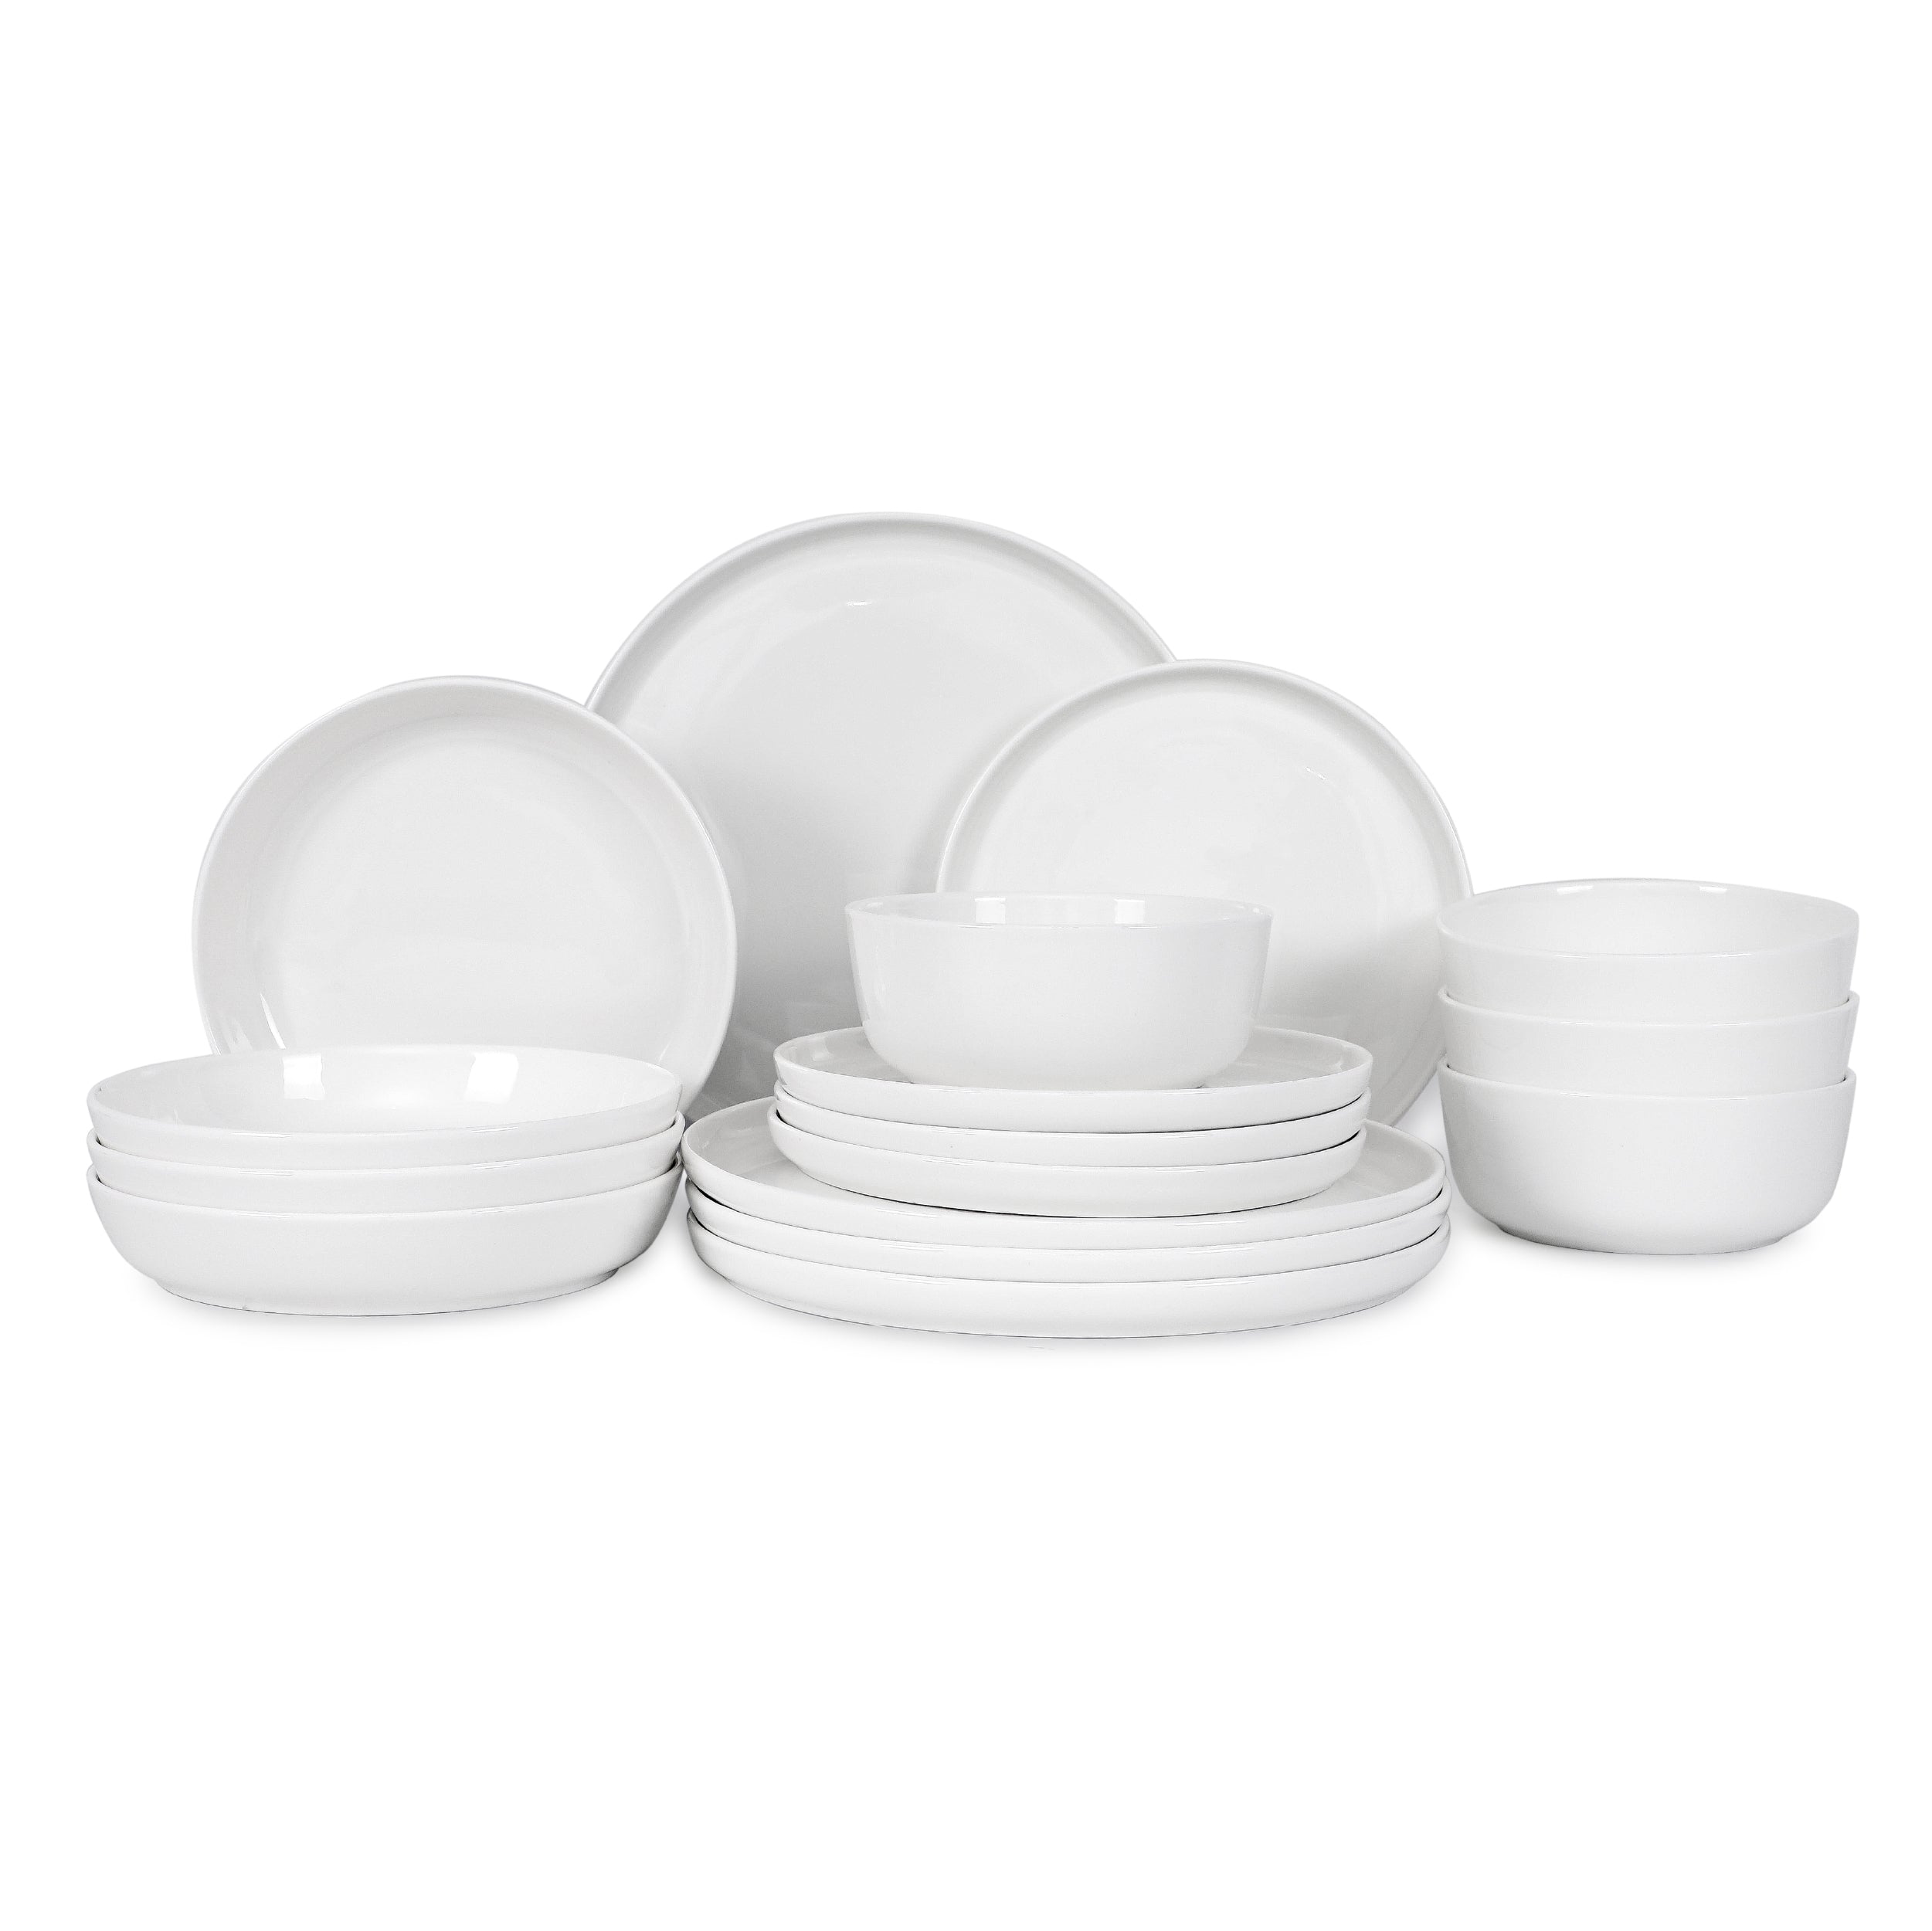 TABLE 12 Natural White Dinnerware Set? 16 Pc Microwave and Dishwasher Safe, White